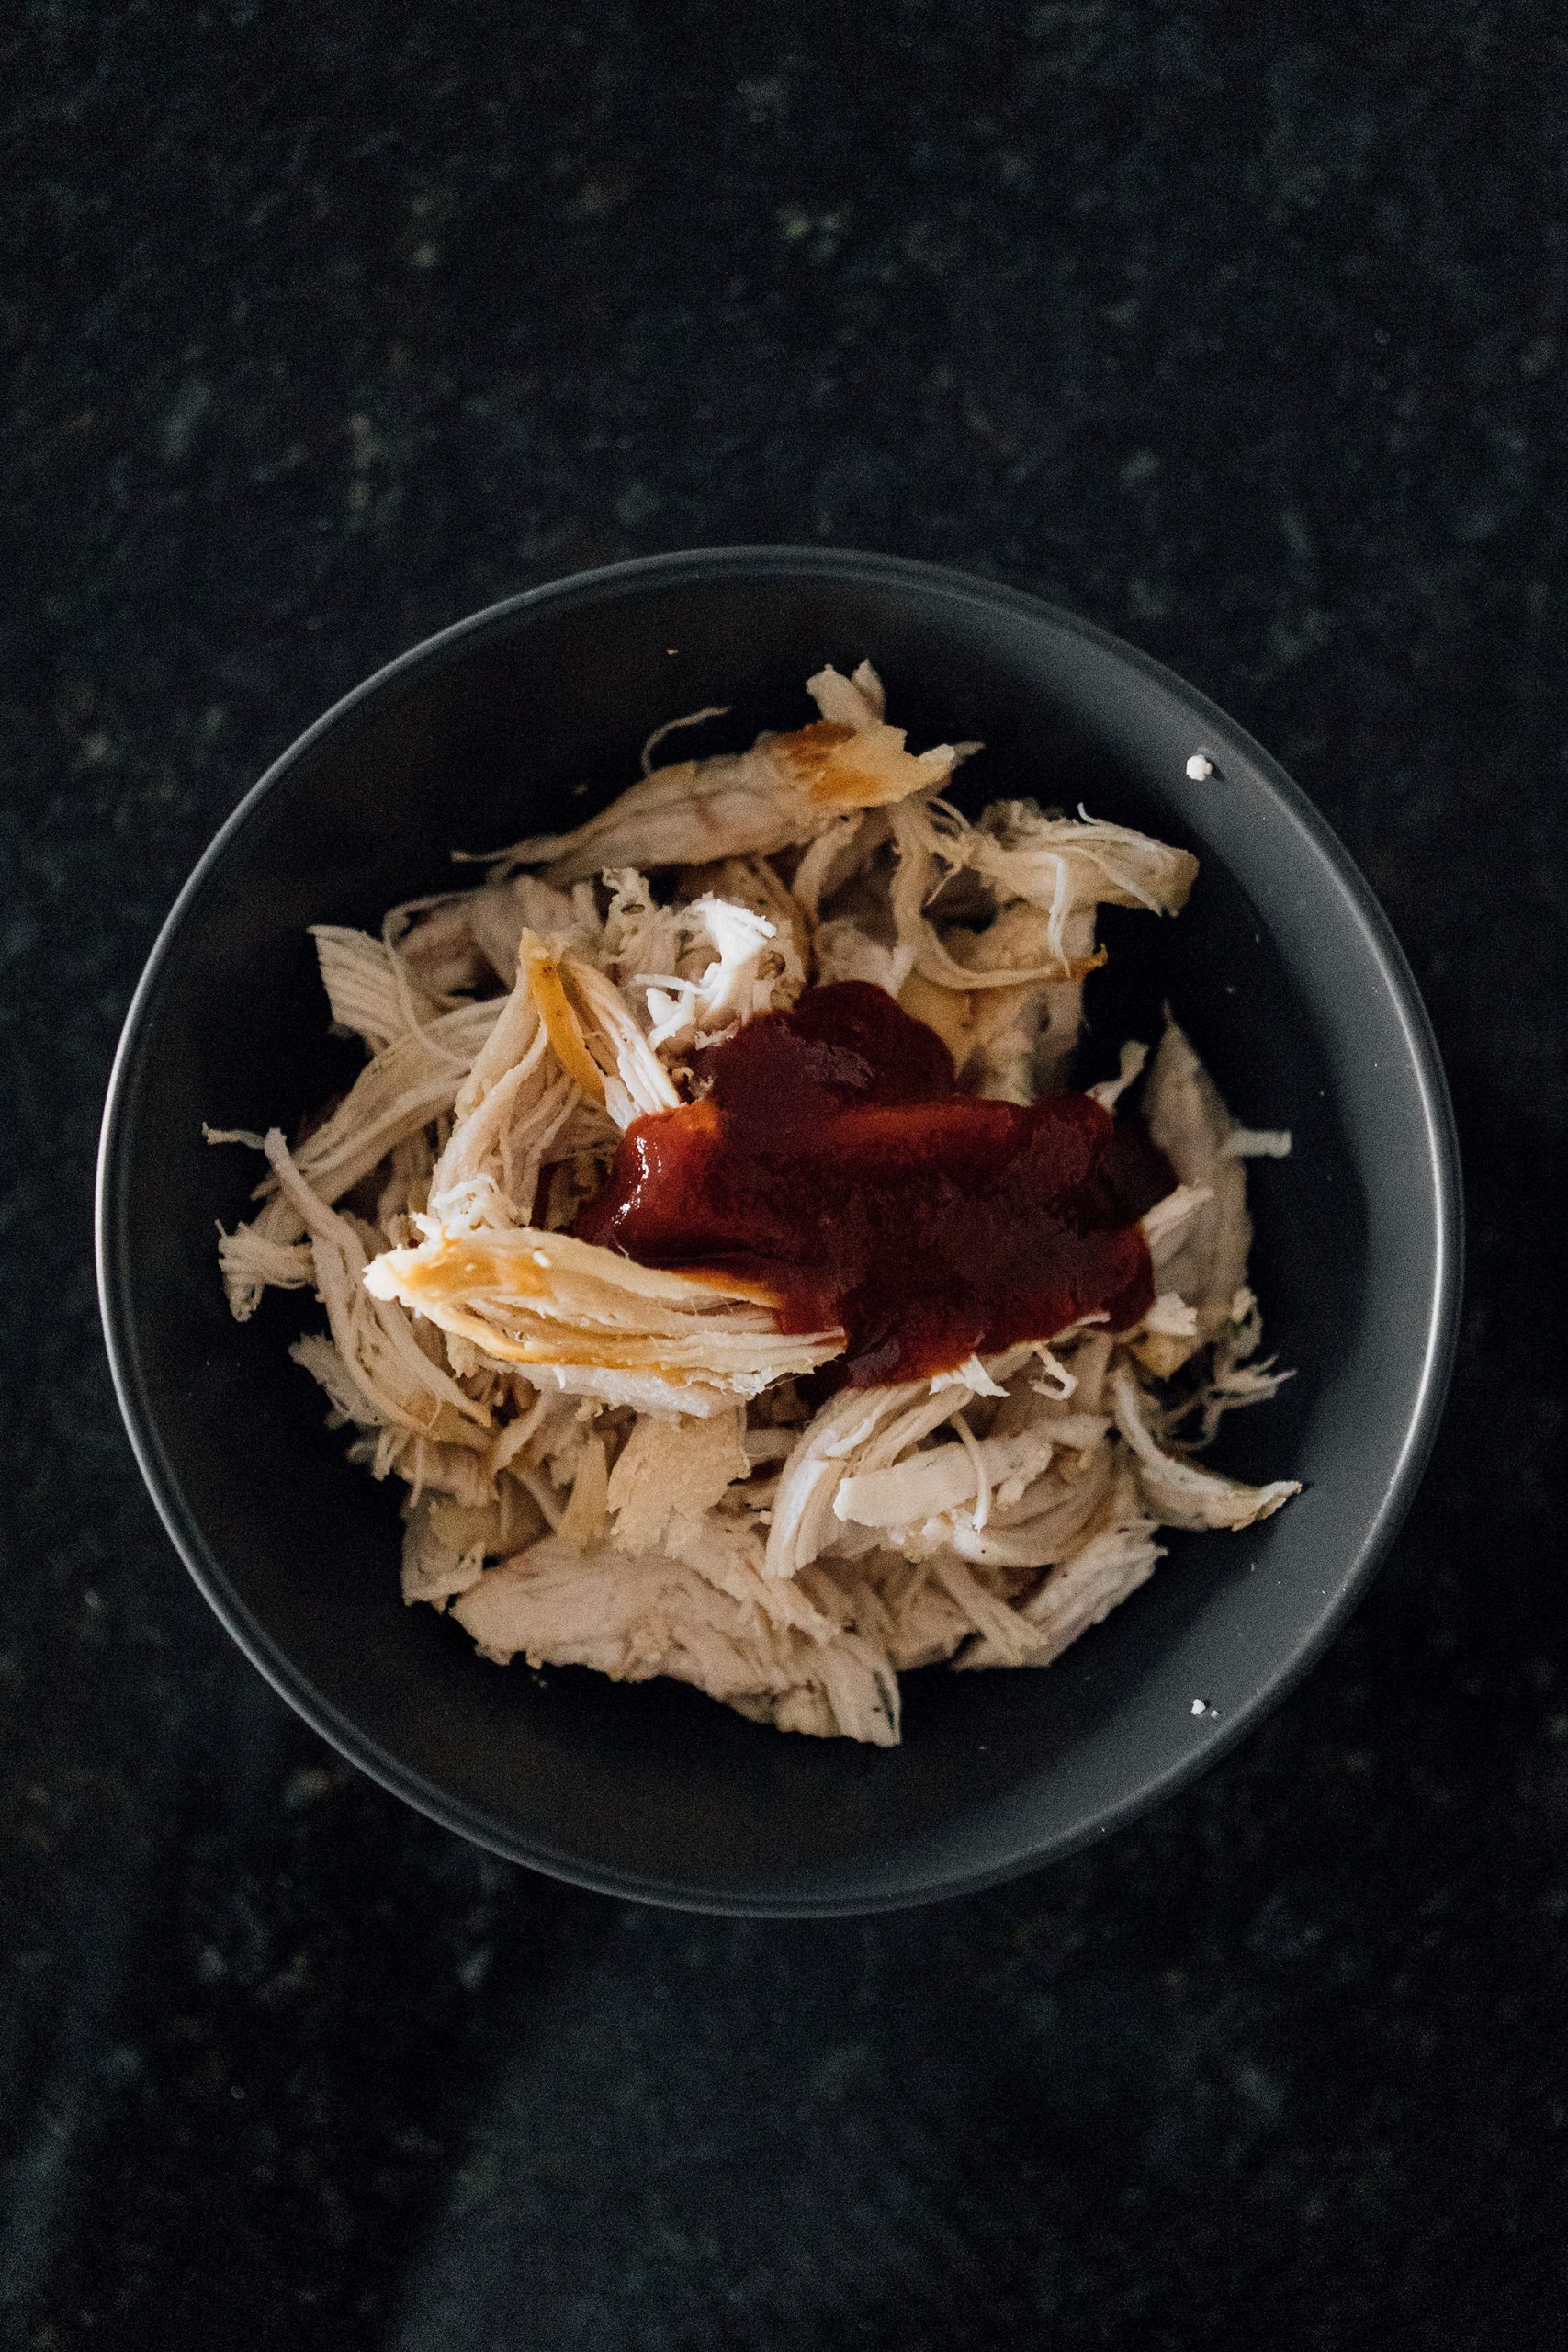 Mix the shredded chicken with remaining 2 tablespoons of BBQ sauce and 1 teaspoon of honey. Scatter on top of bases.